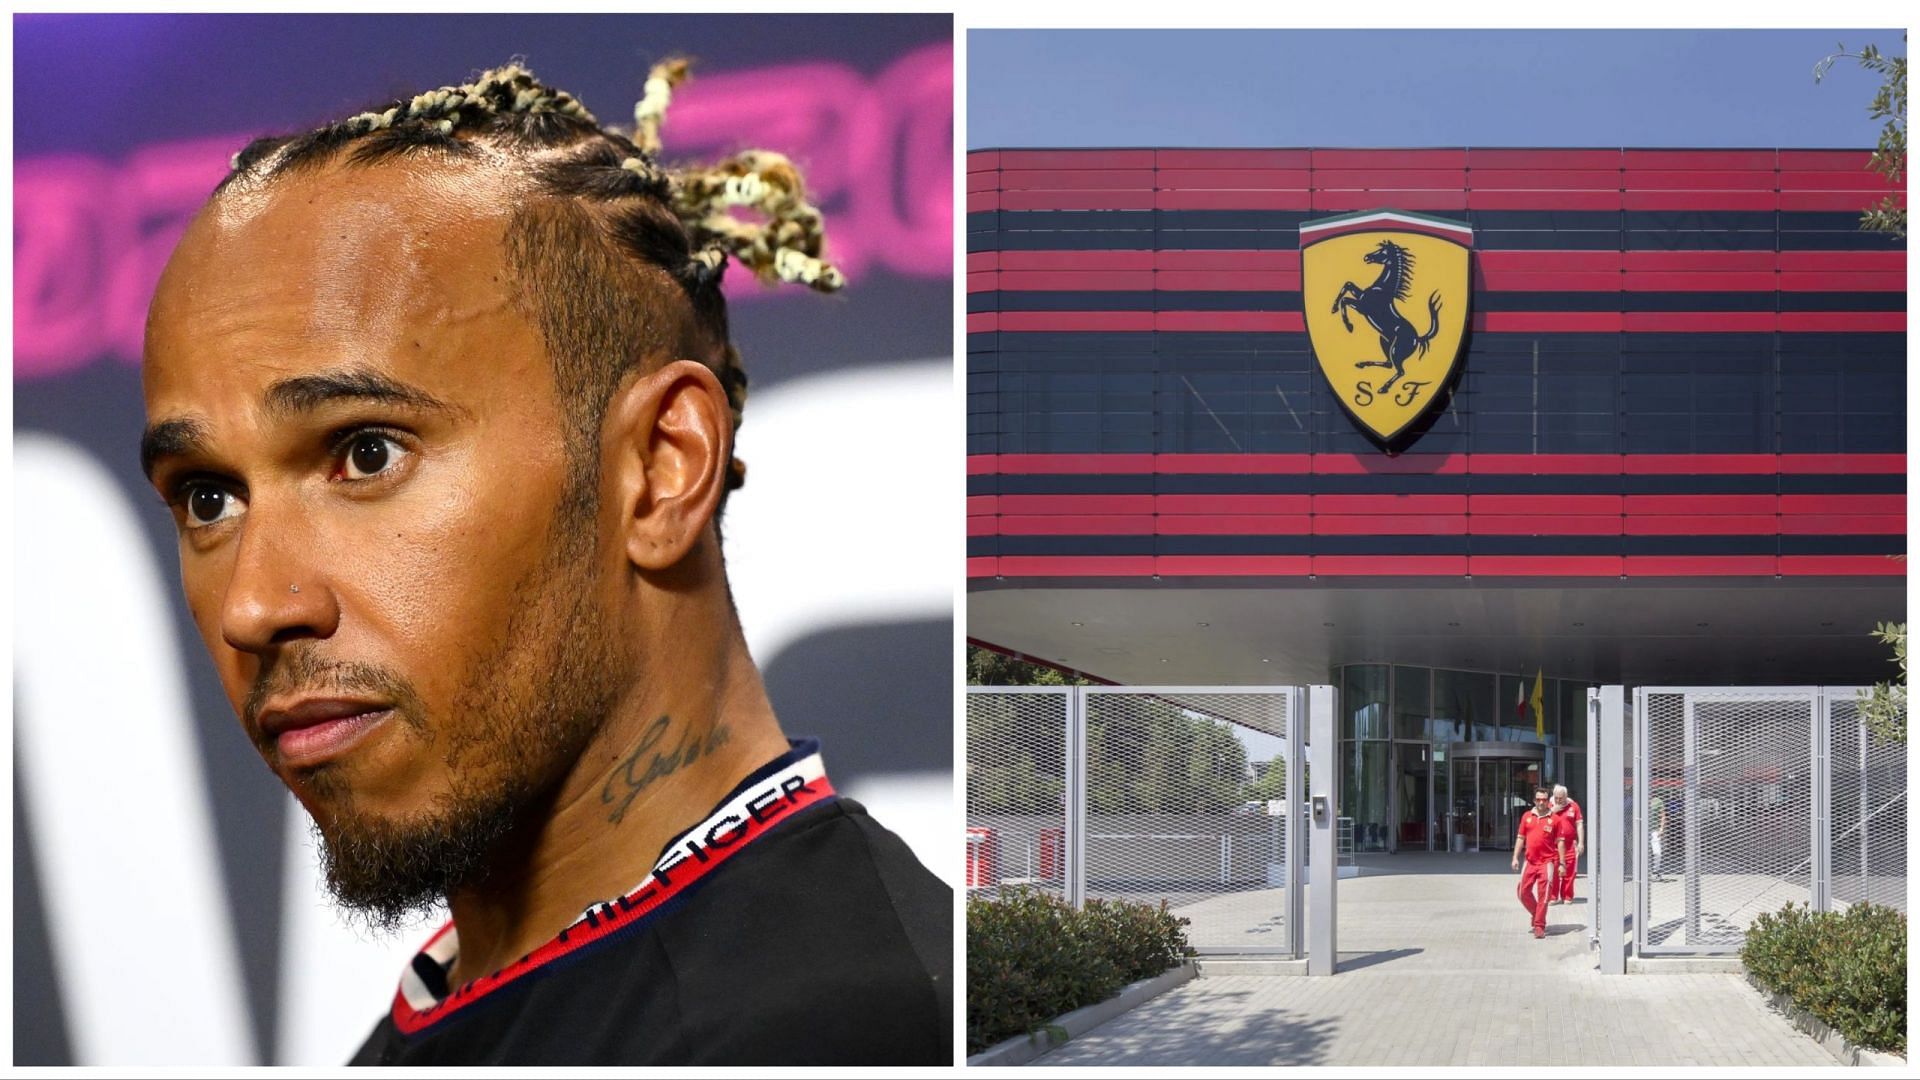 Lewis Hamilton reveals he had no offer from Ferrari amidst the rumours